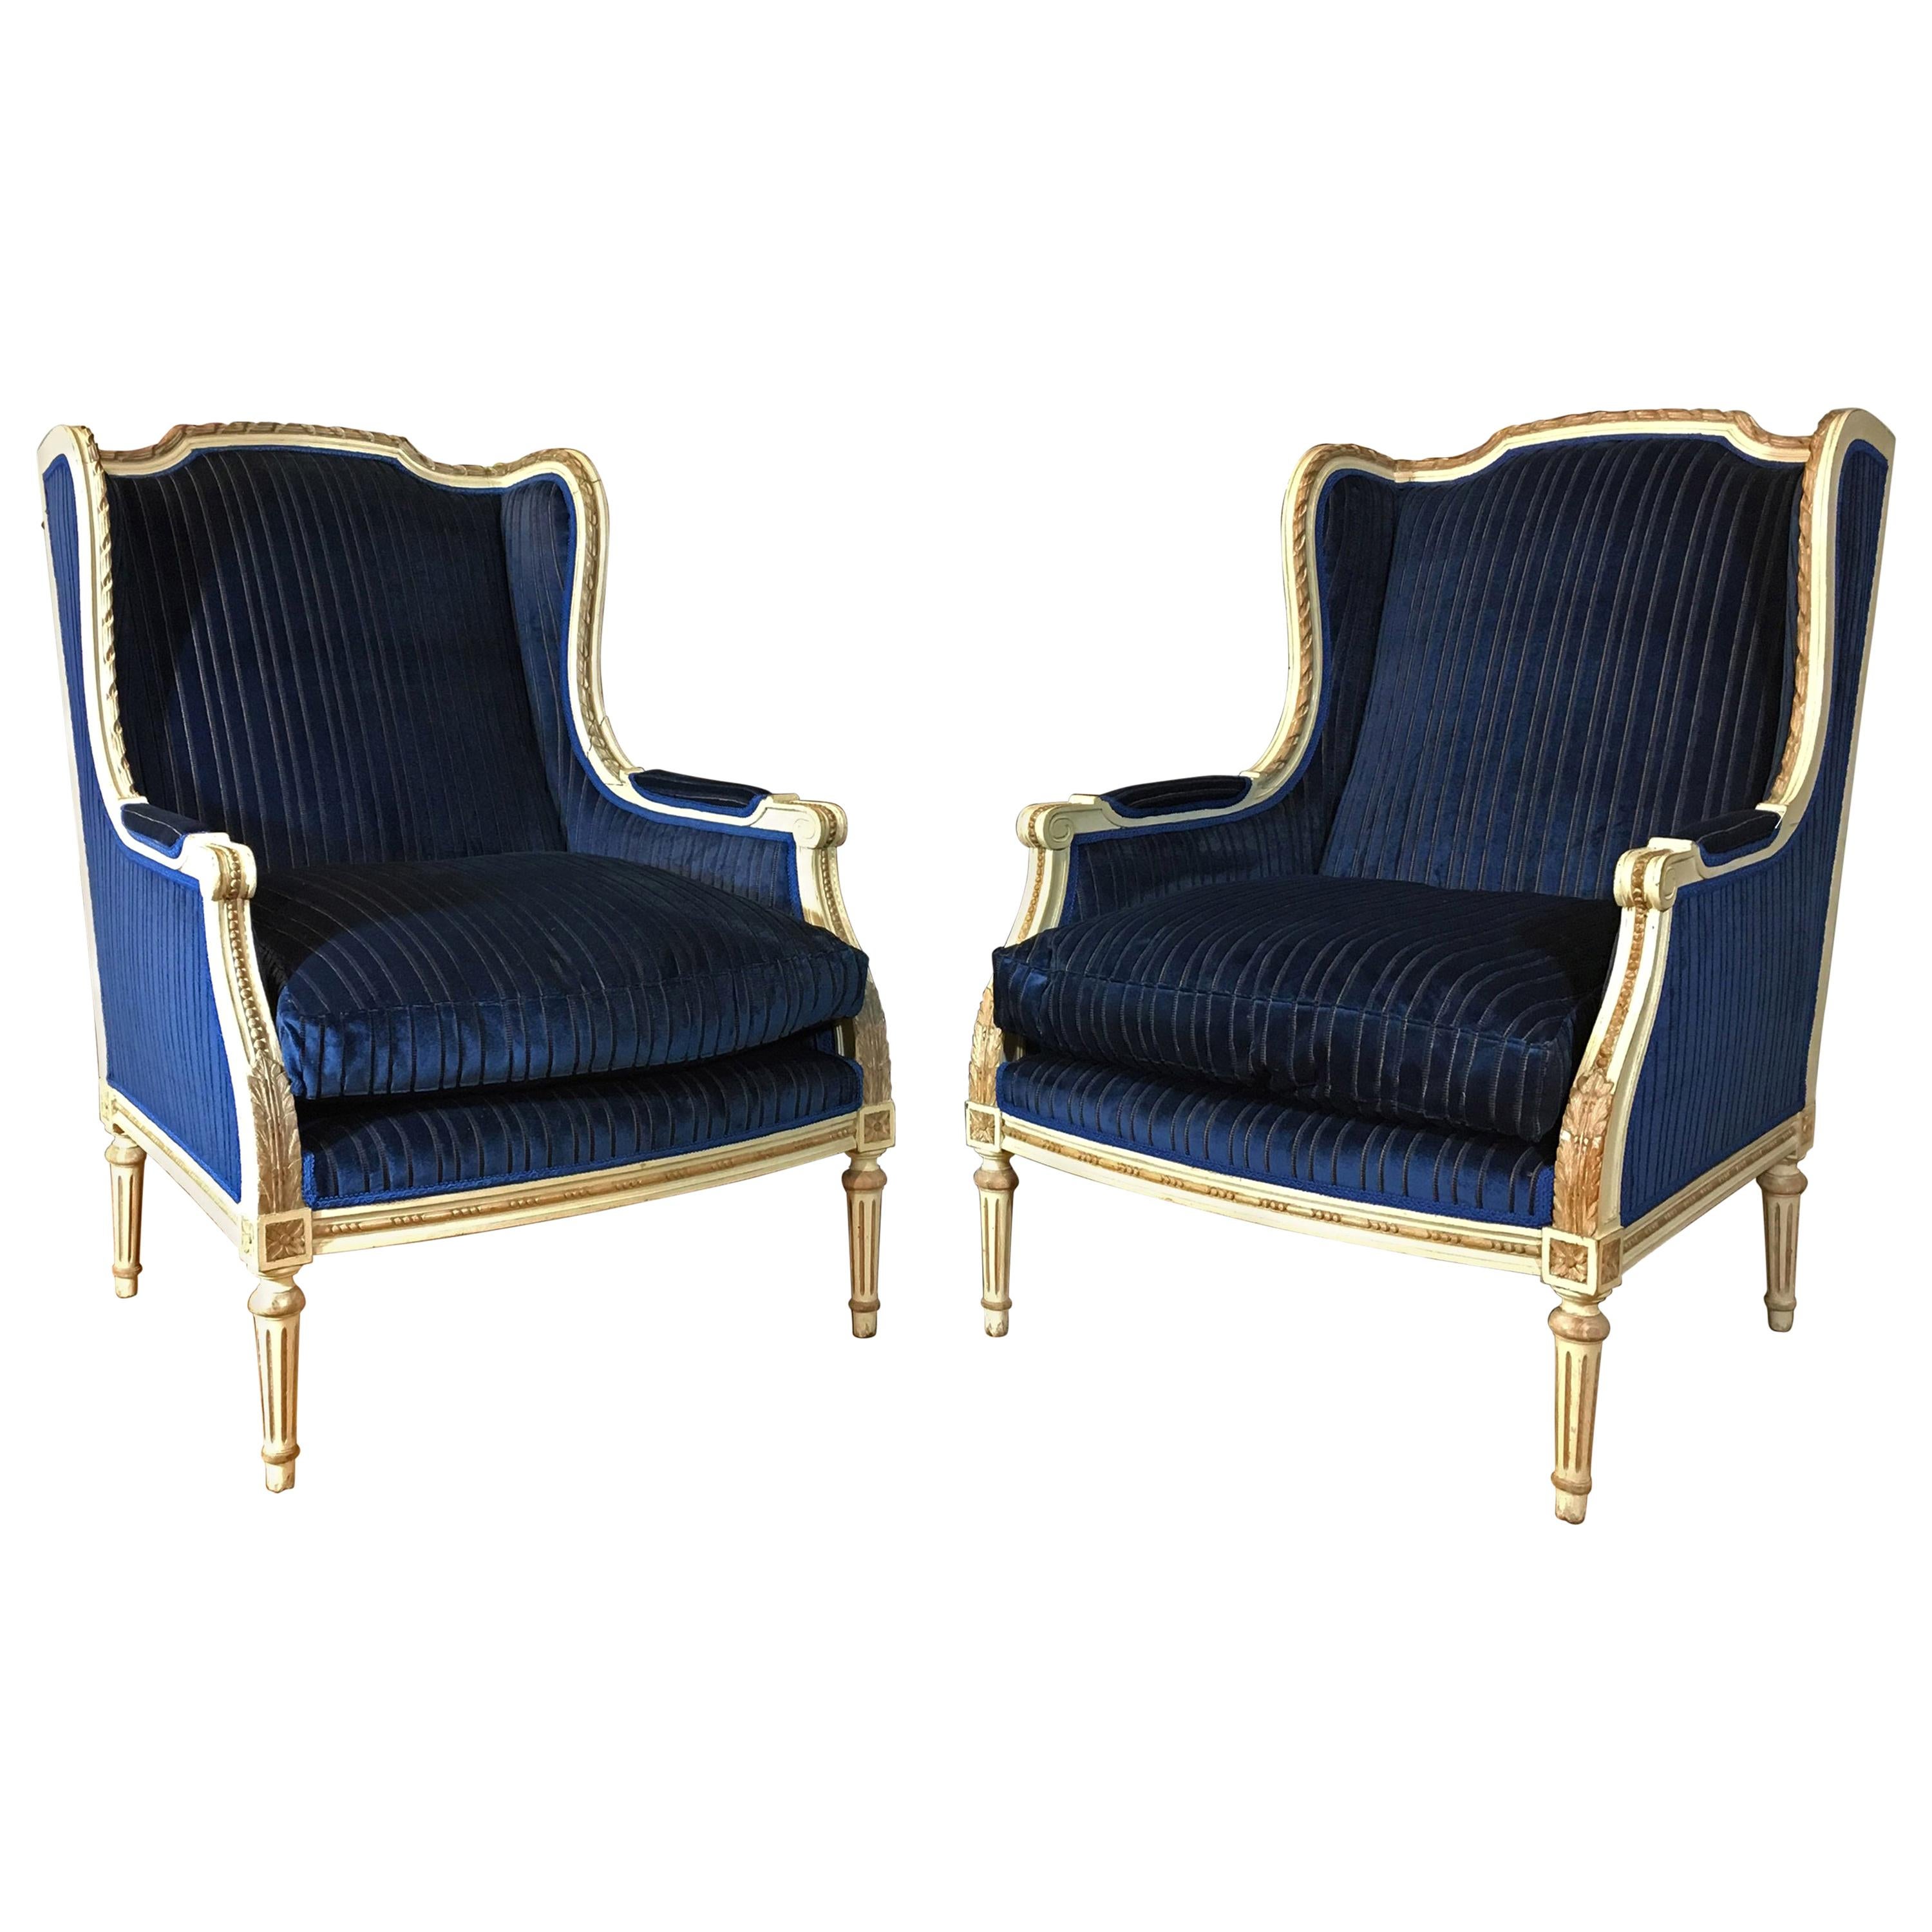 Mid-19th Century Italian Louis XVI Style Painted Polpar Wood Wing Chairs For Sale